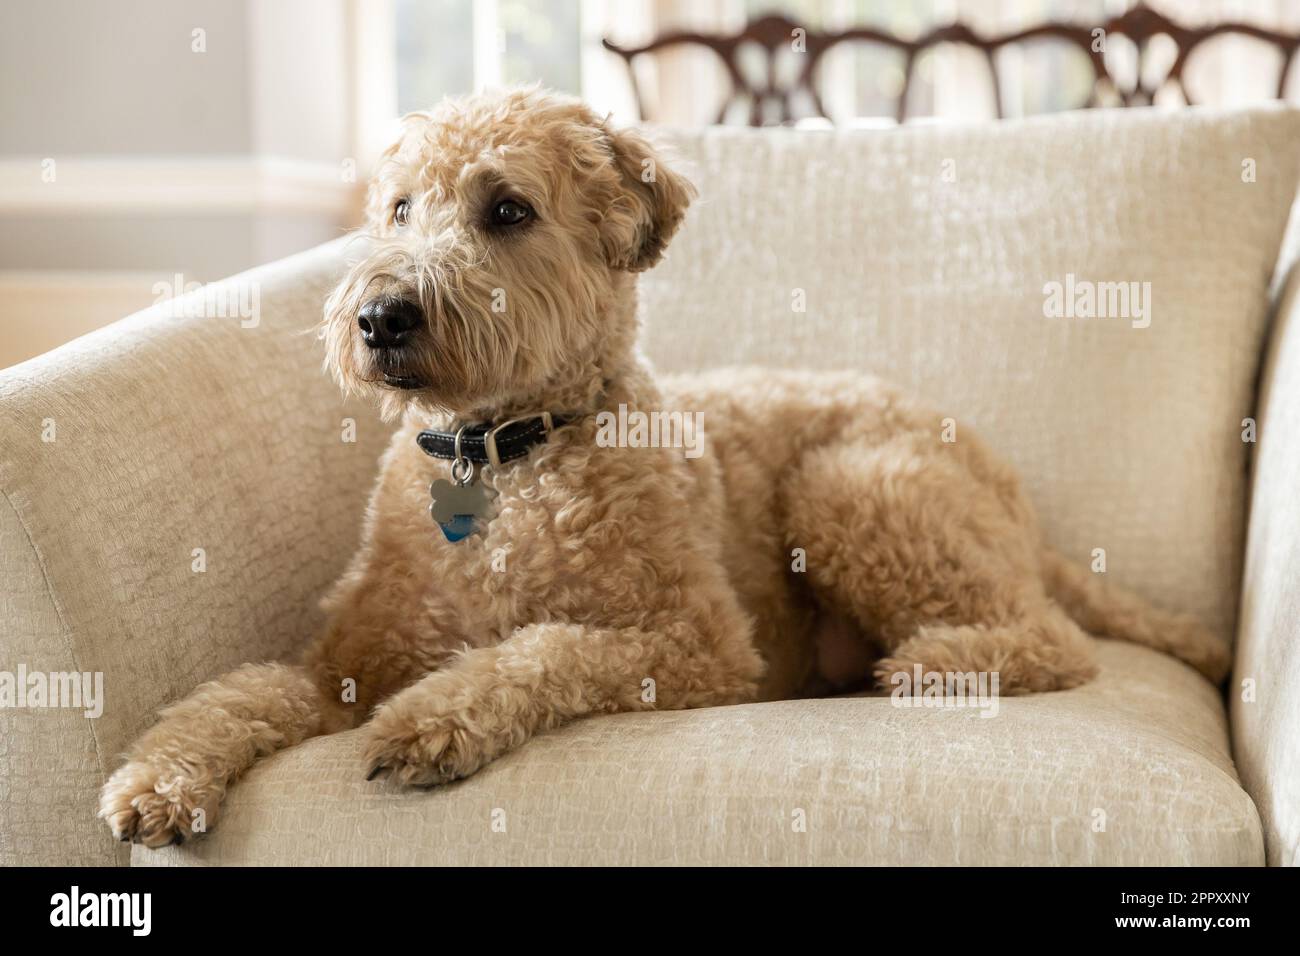 A brown, soft-coated wheaten terrier and poodle mix dog laying on a brown chair with a blurred background. Stock Photo